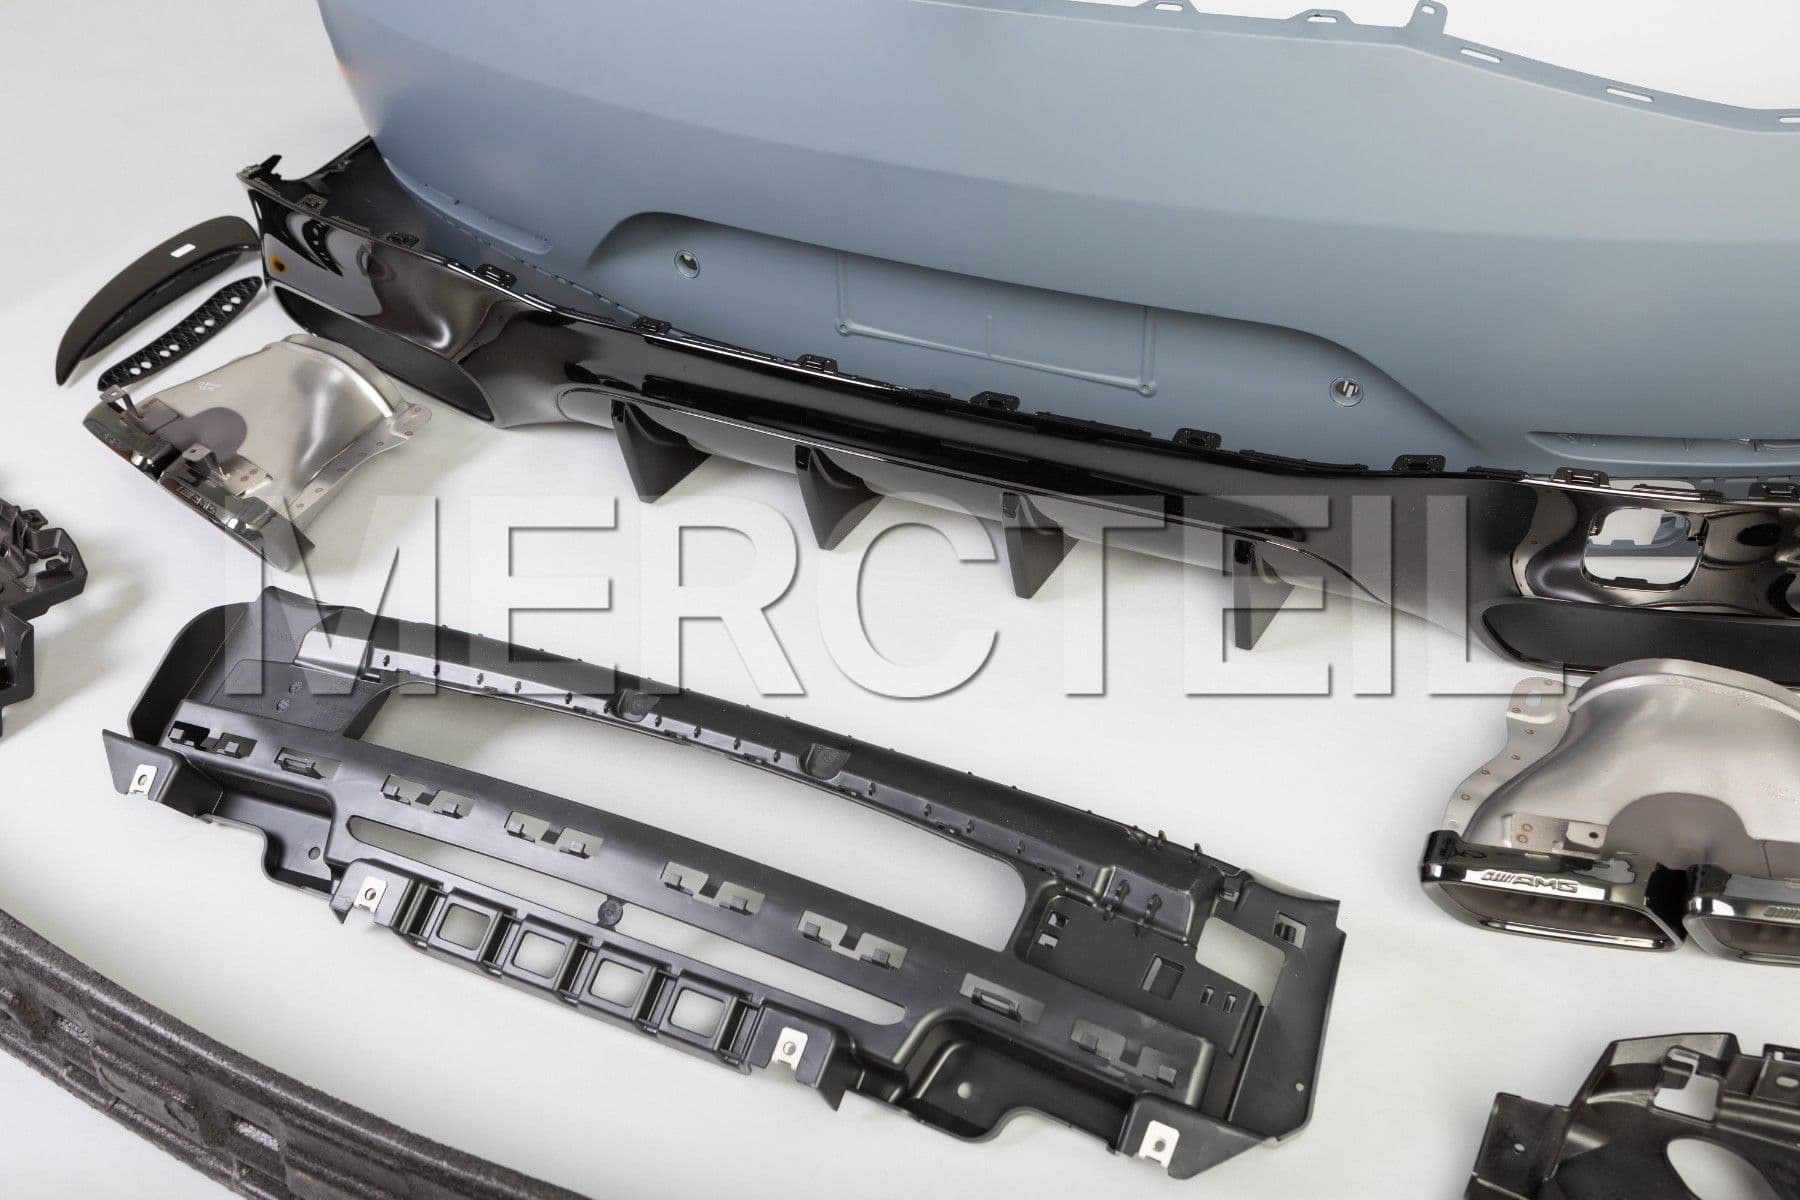 GT63s AMG 4 Door Conversion Kit X290 Genuine Mercedes AMG (part number: 
A29088534009999)